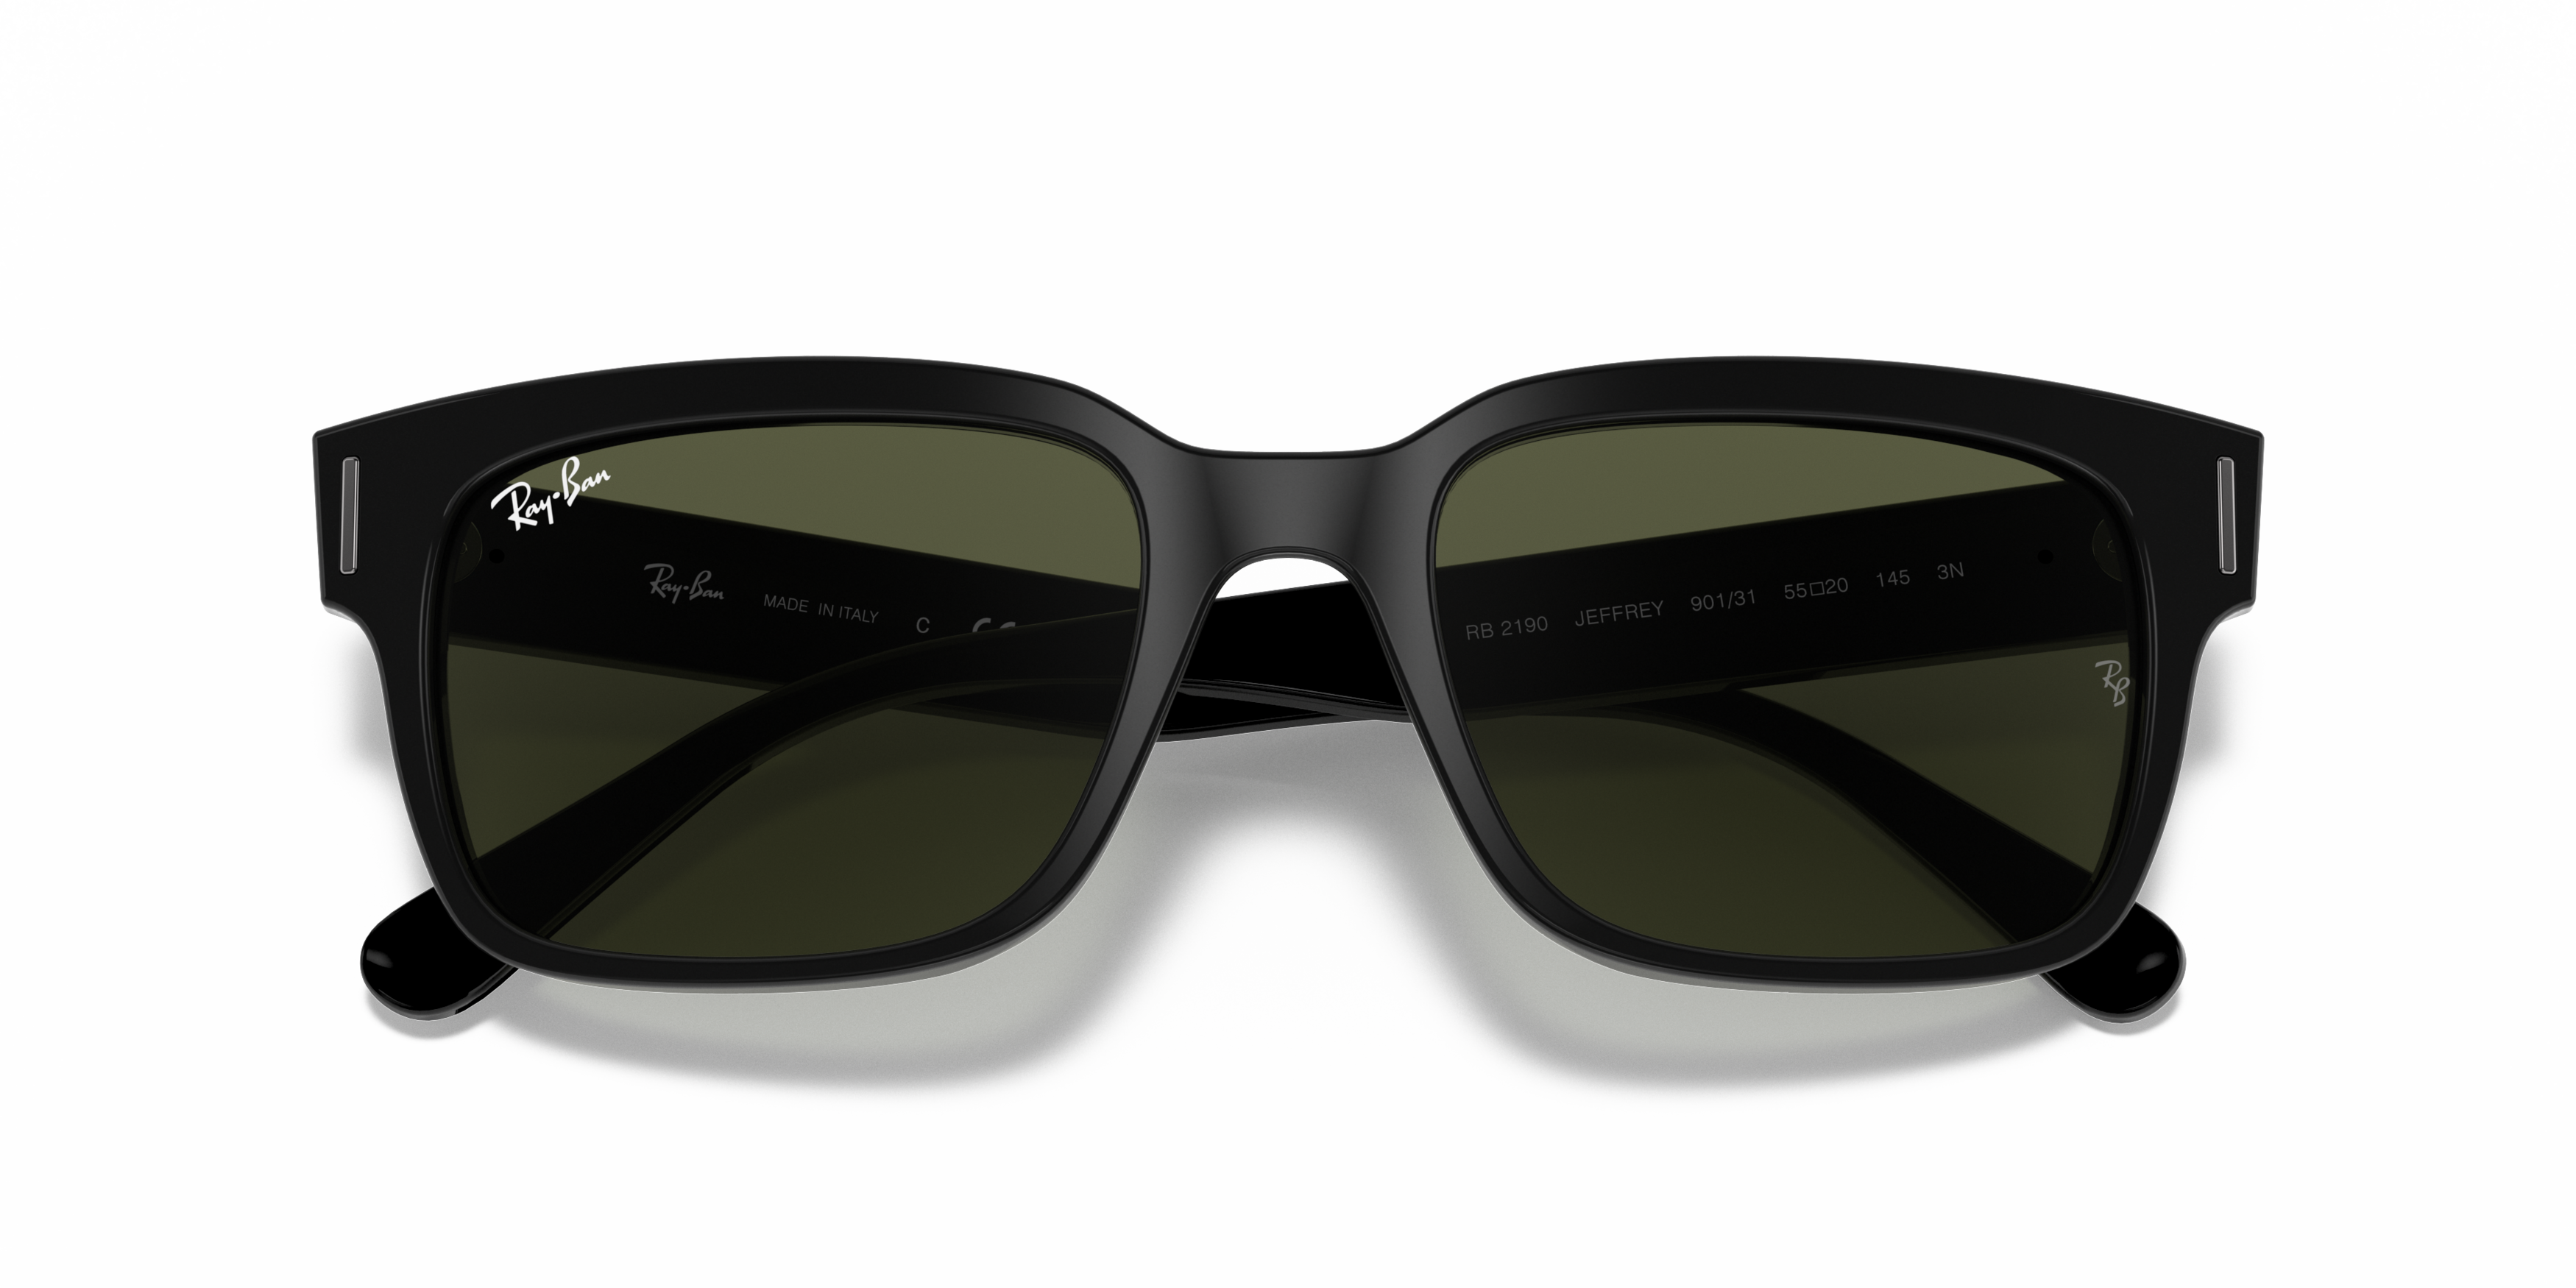 [products.image.folded] Ray-Ban JEFFREY RB2190 901/31